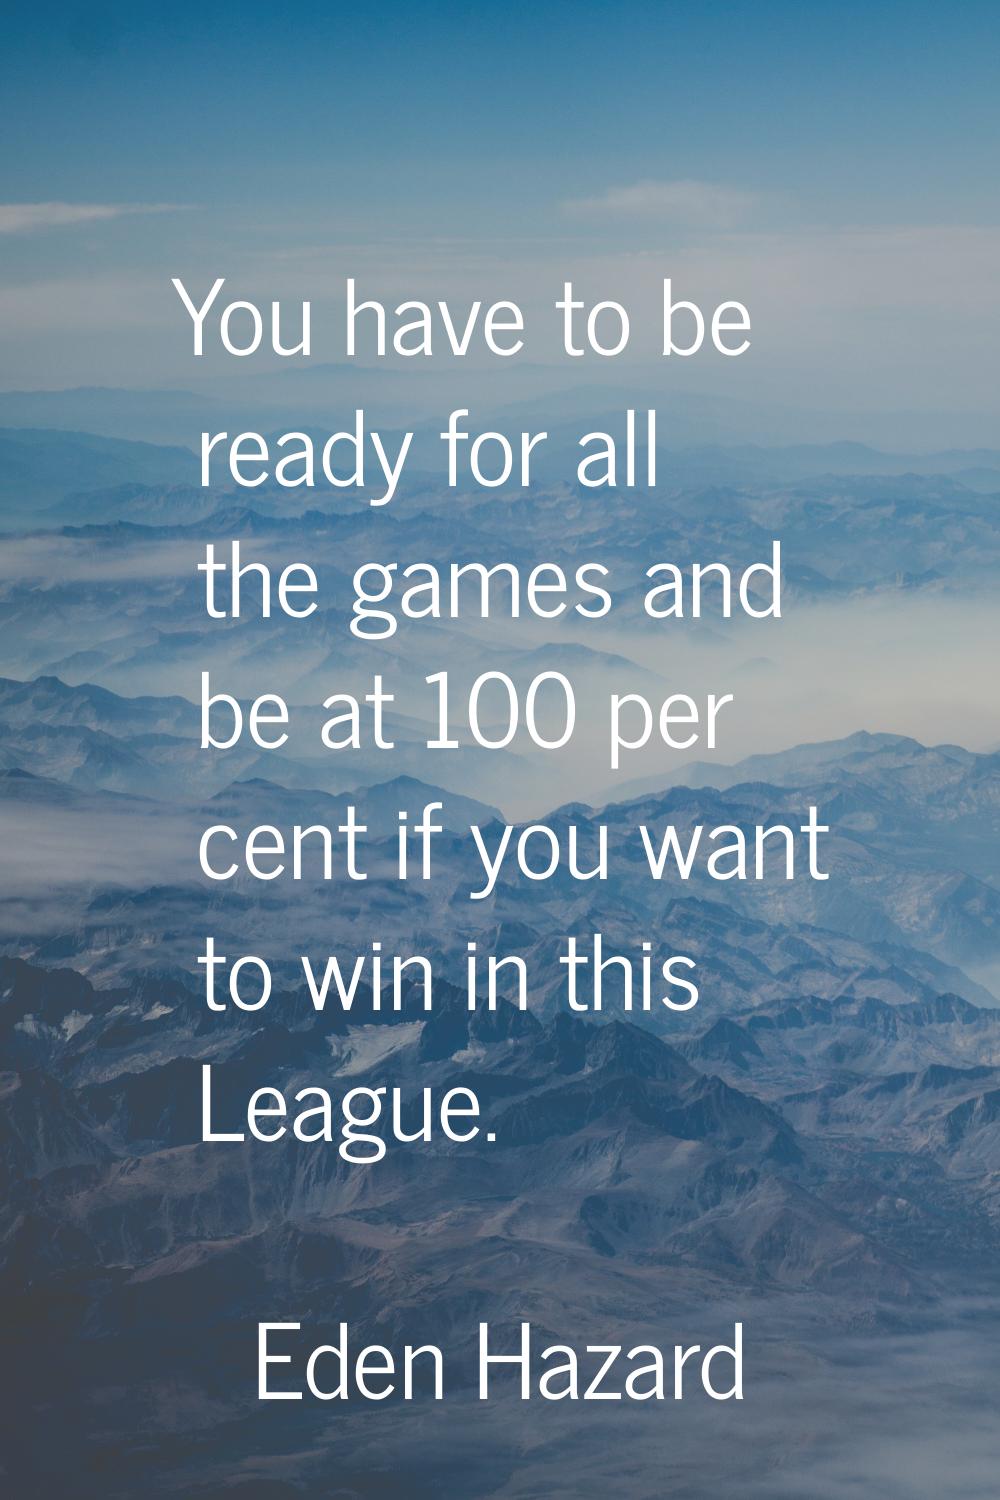 You have to be ready for all the games and be at 100 per cent if you want to win in this League.